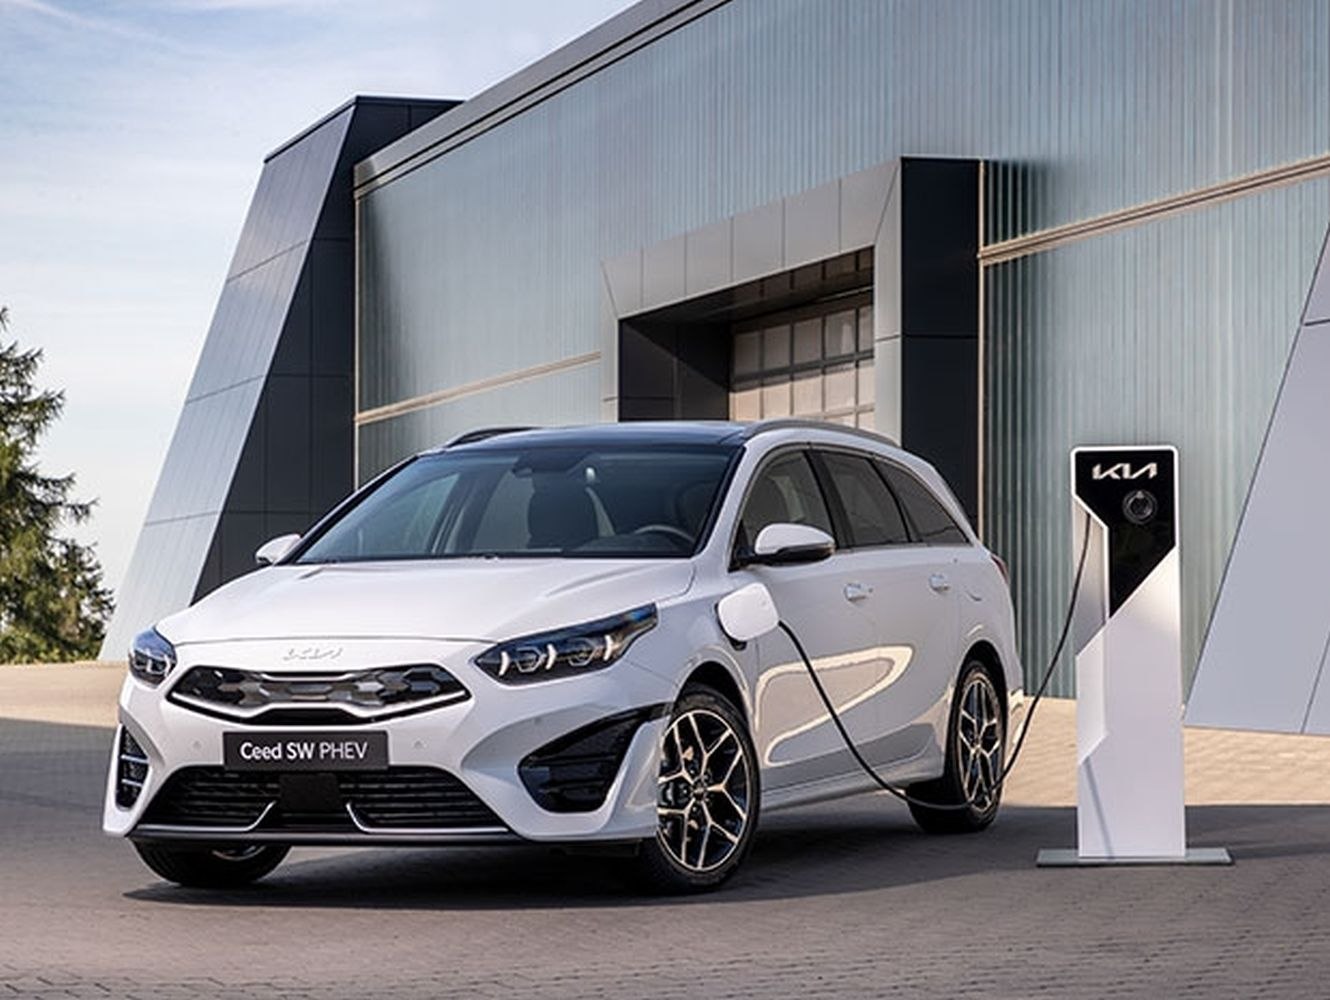 Kia Ceed Sportswagon dimensions, boot space and electrification